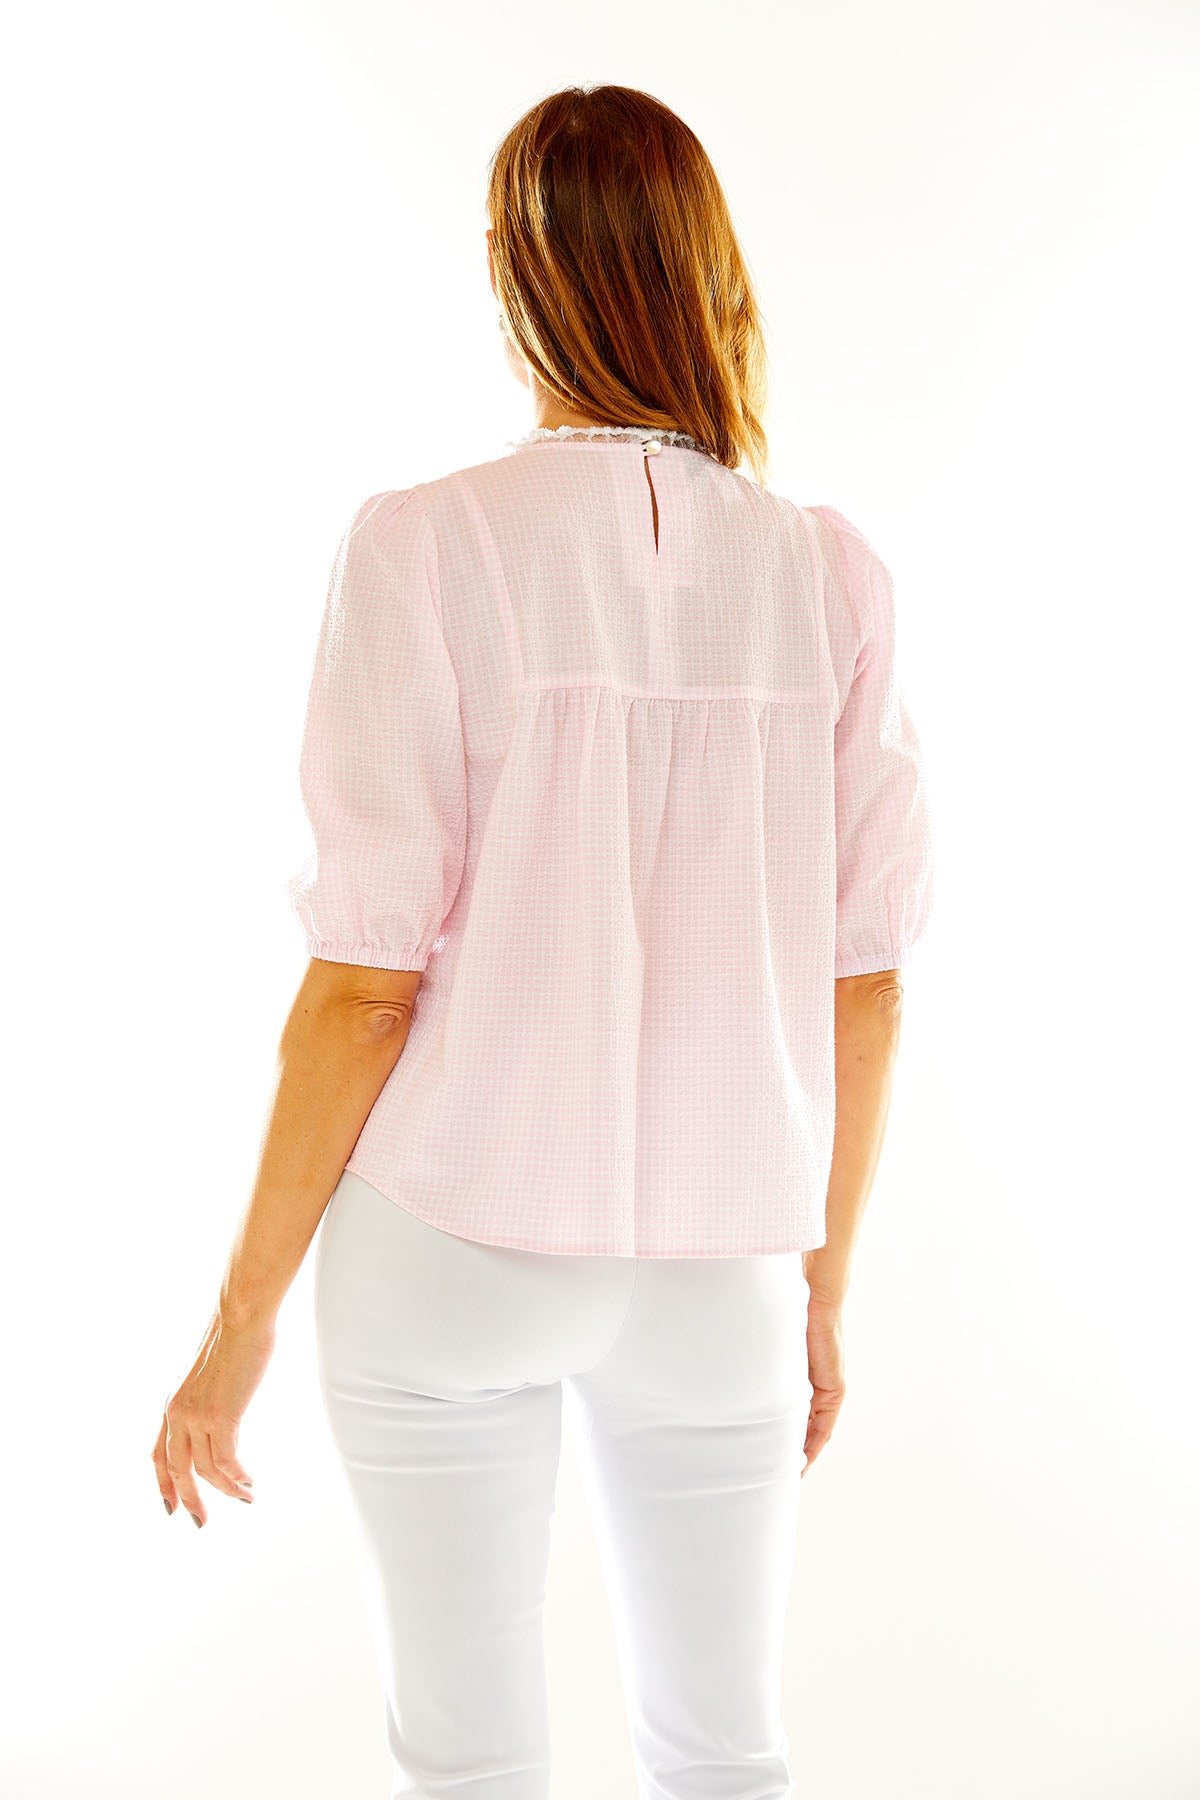 Woman in pink blouse